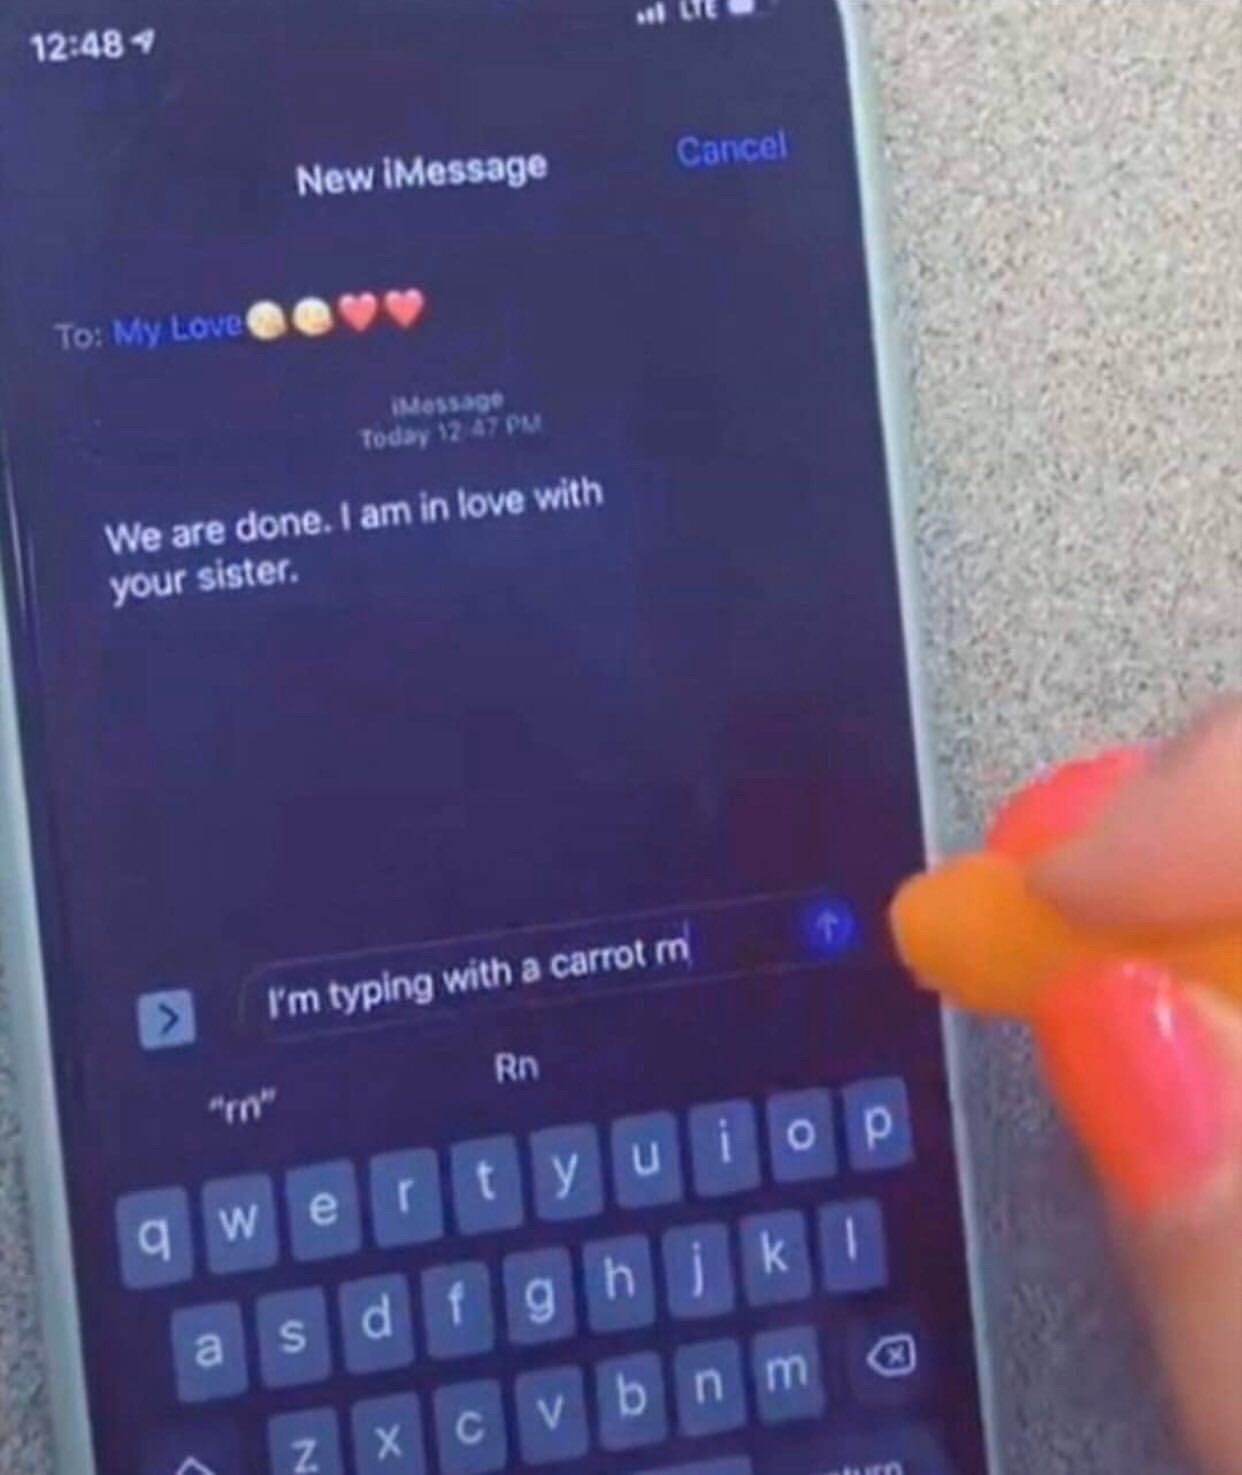 im typing with a carrot - Cancel New iMessage To My Love Massage Today 12 47 Pm We are done. I am in love with your sister. I'm typing with a carrot in Rn qwertyuiop a s d f g h j k I C v bnm@